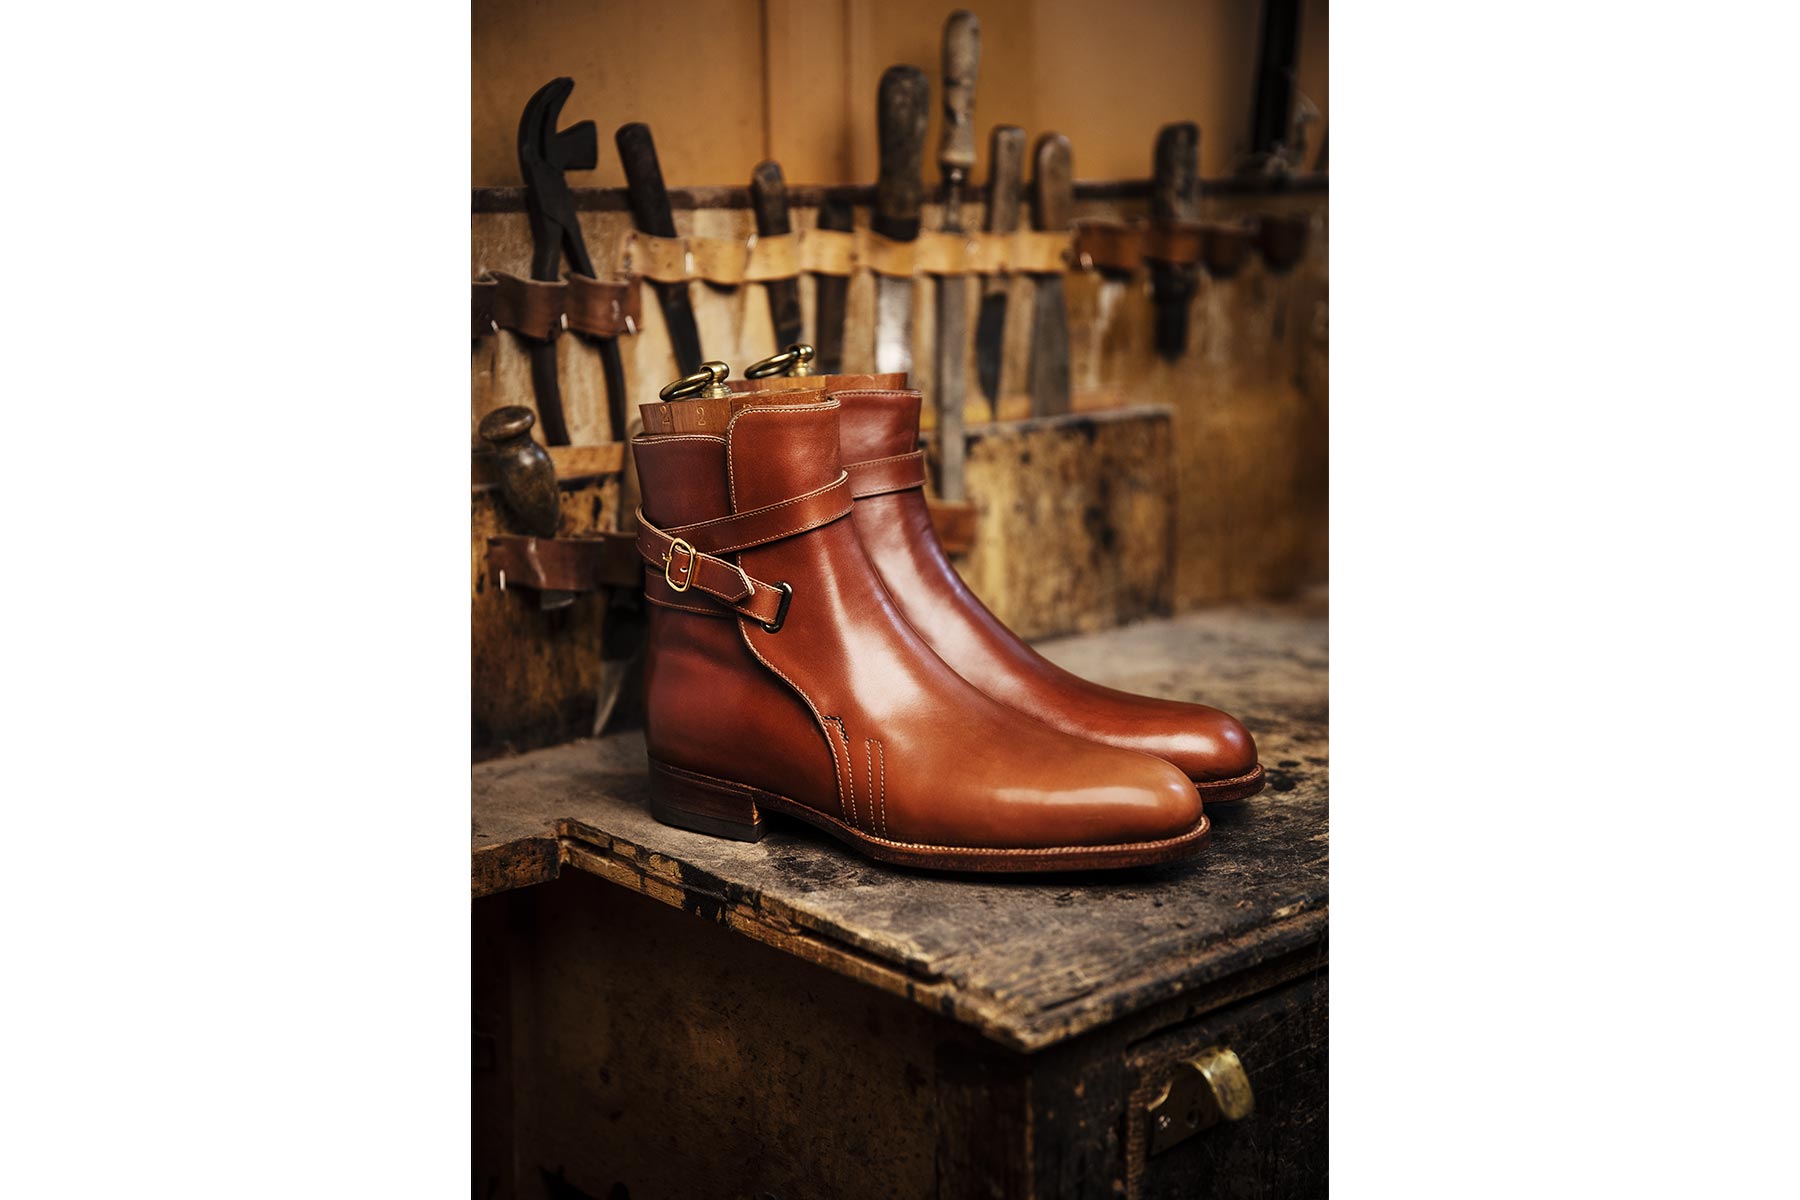 From John Lobb to Cleverley, 4 Best British Men's Luxury Shoemakers – Robb  Report